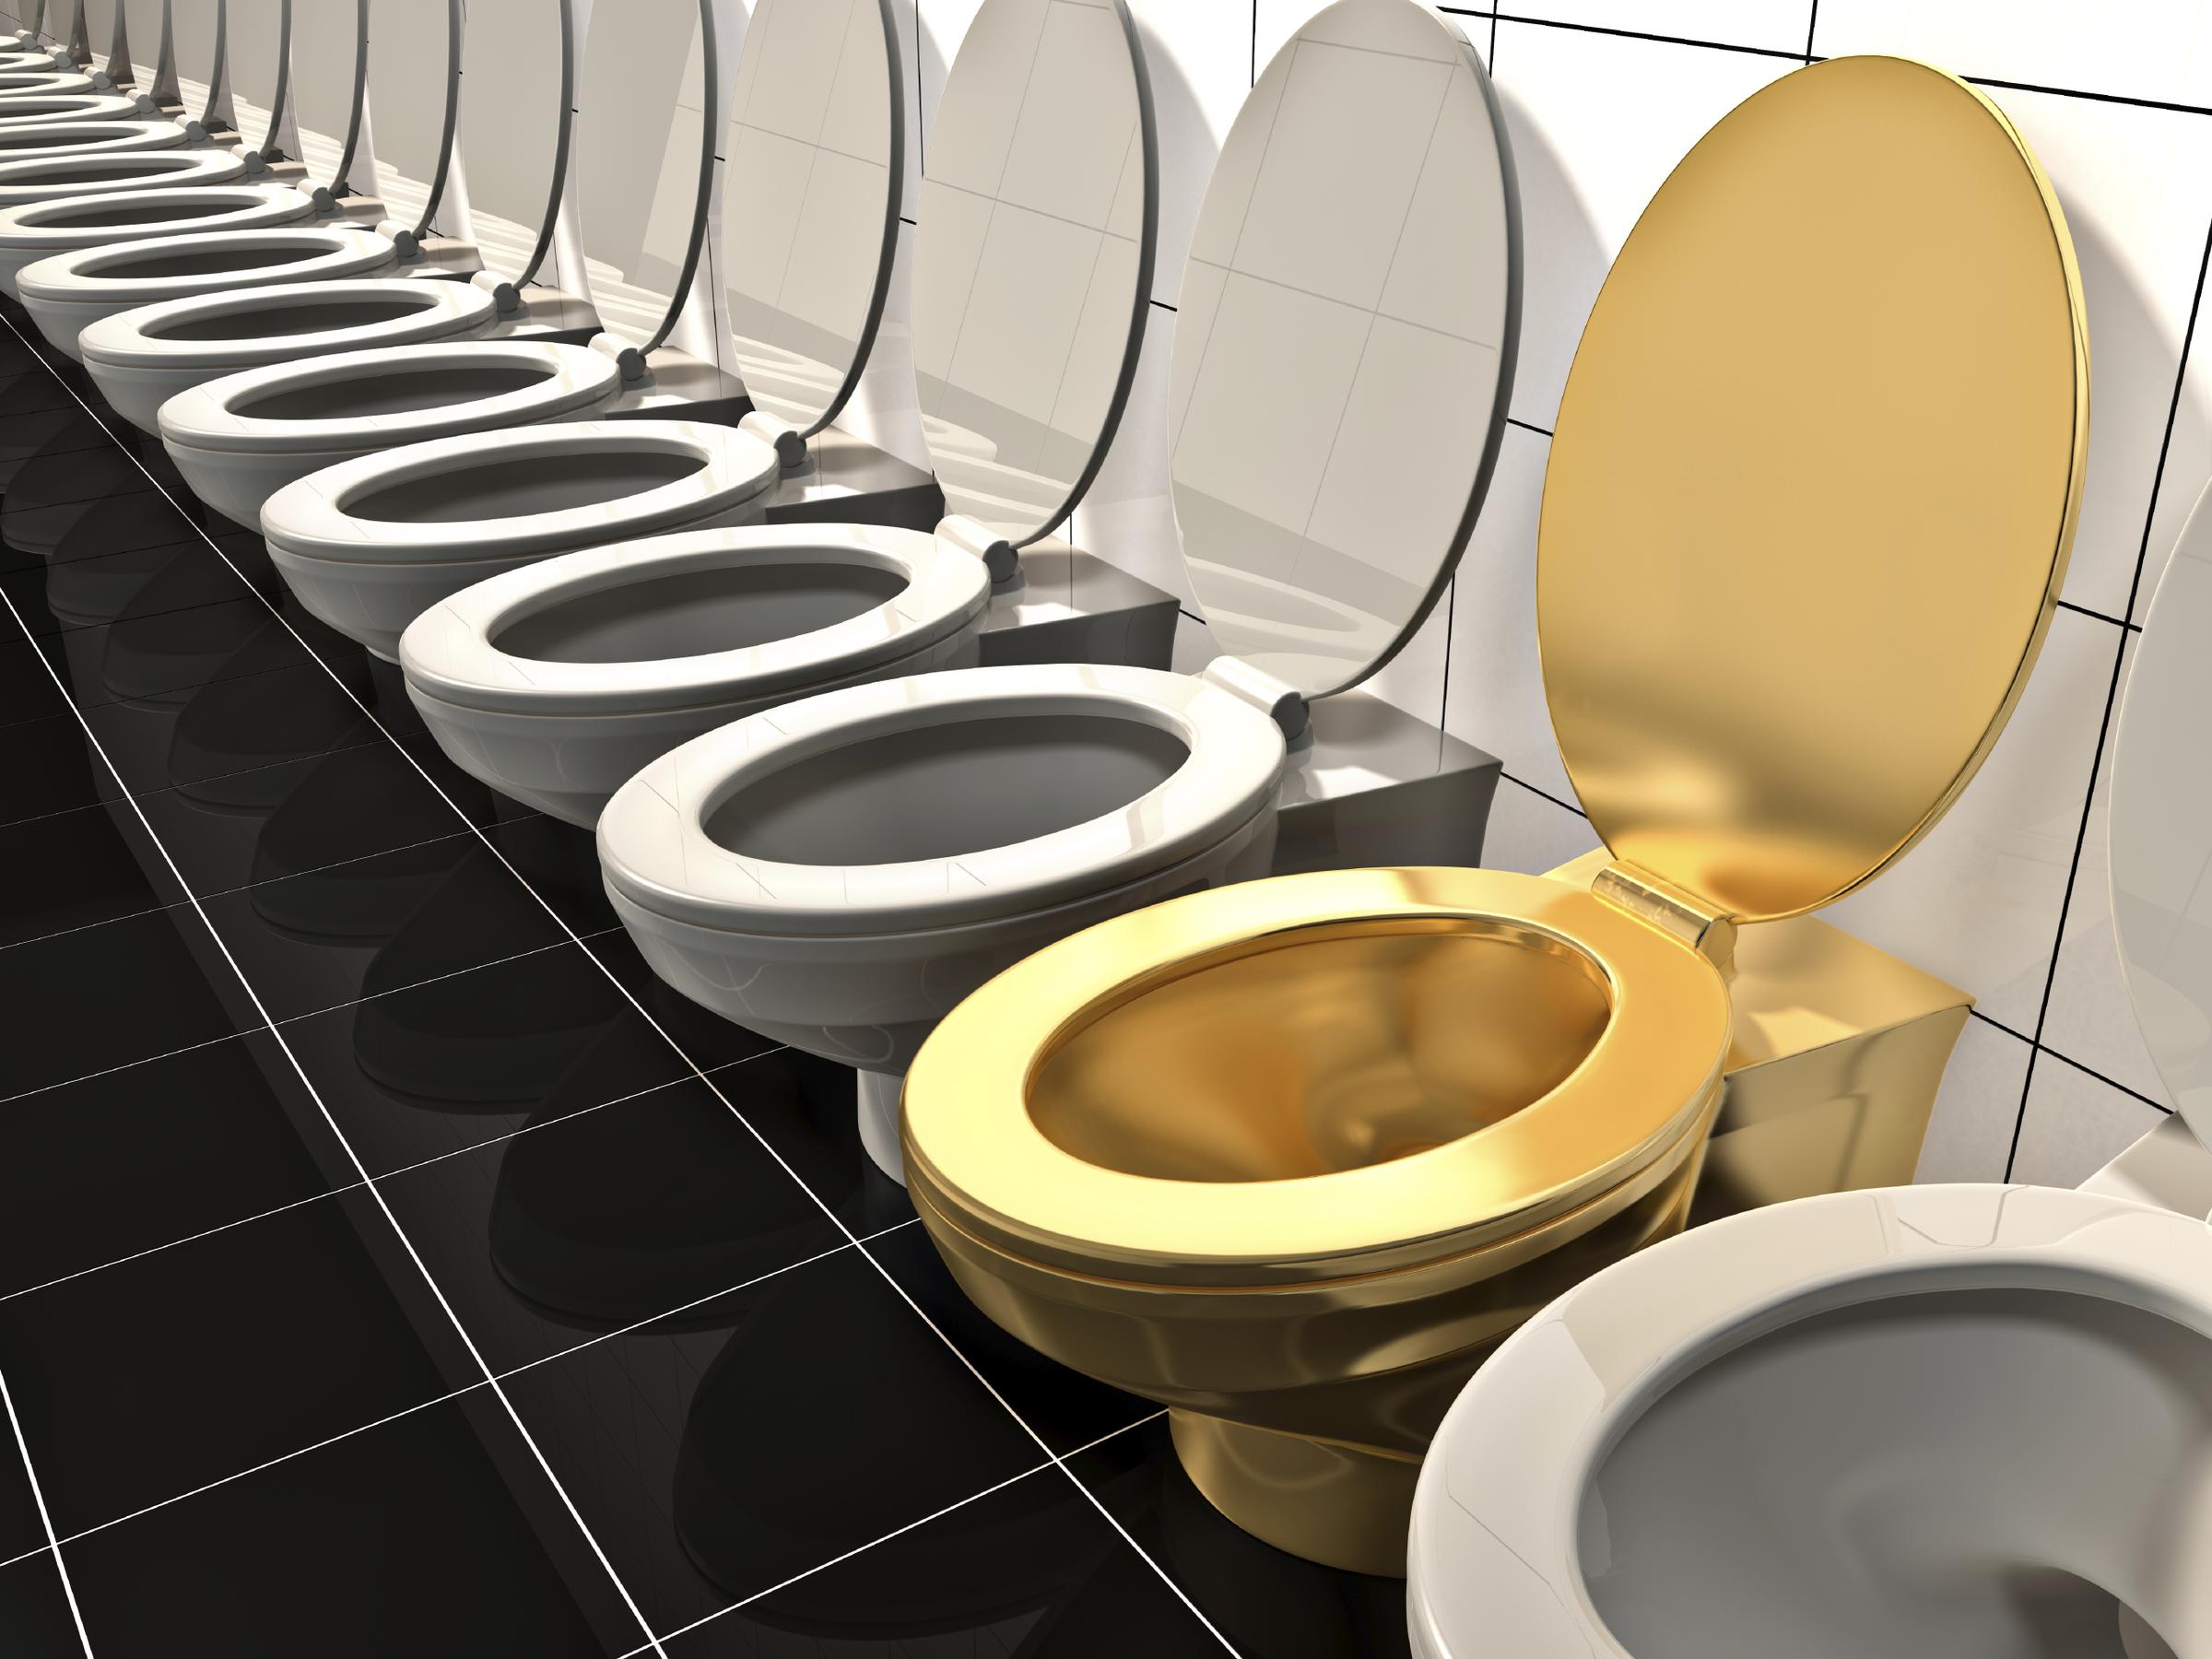 Elite gold office Toilet. Made in 3d